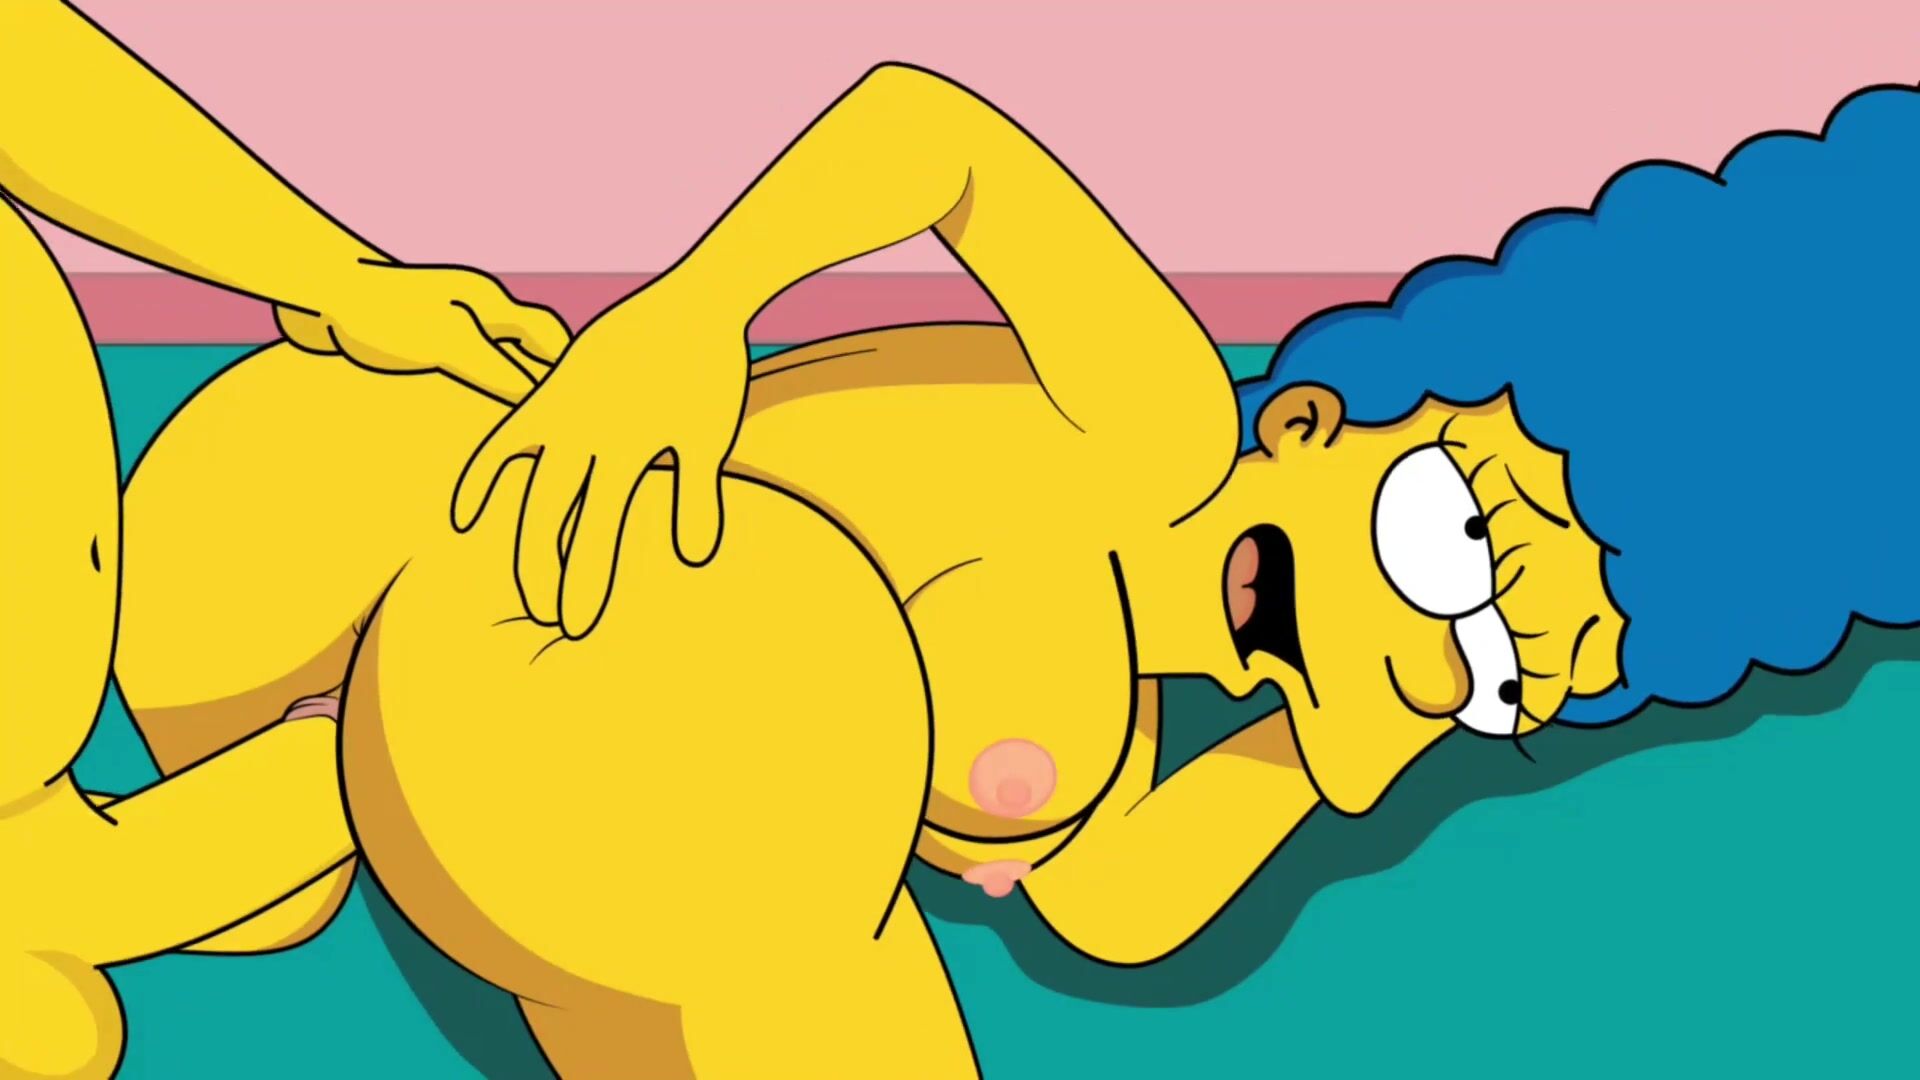 THE SIMPSONS| MARGE PLOWED DOGGY STYLE